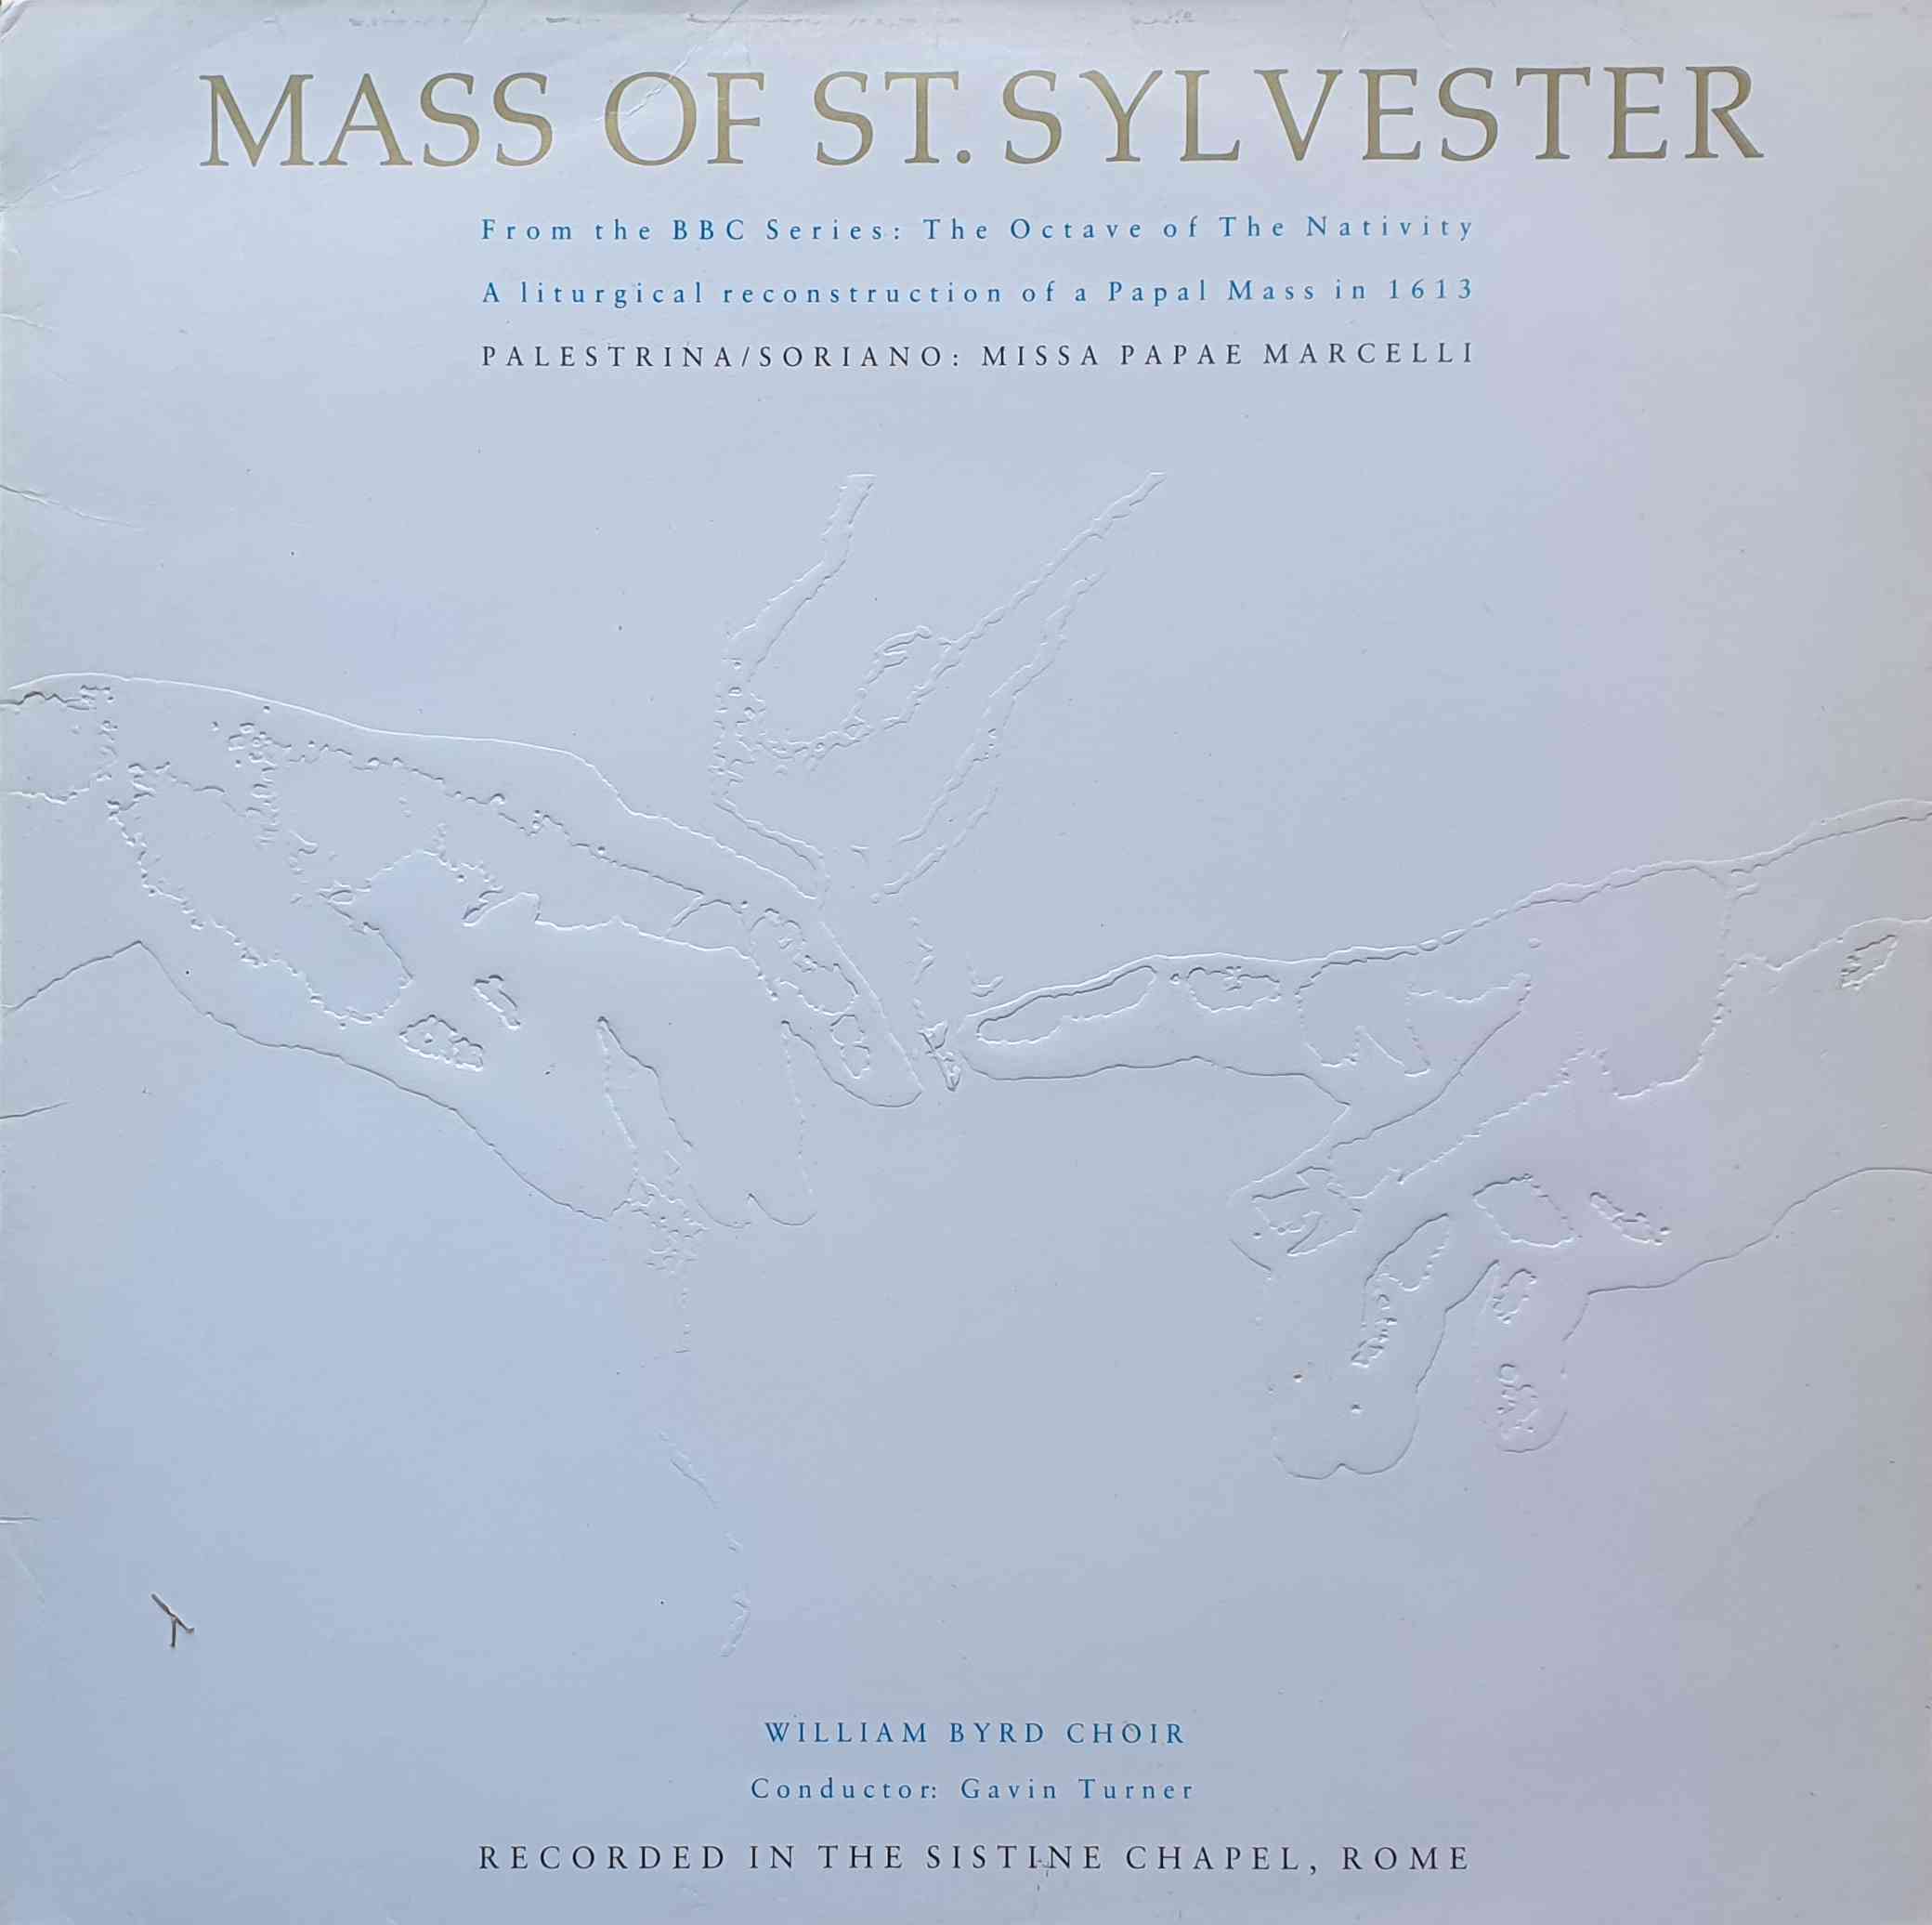 Picture of REGL 572 Mass of St. Sylvester by artist Arr. Francesco Soriano from the BBC albums - Records and Tapes library